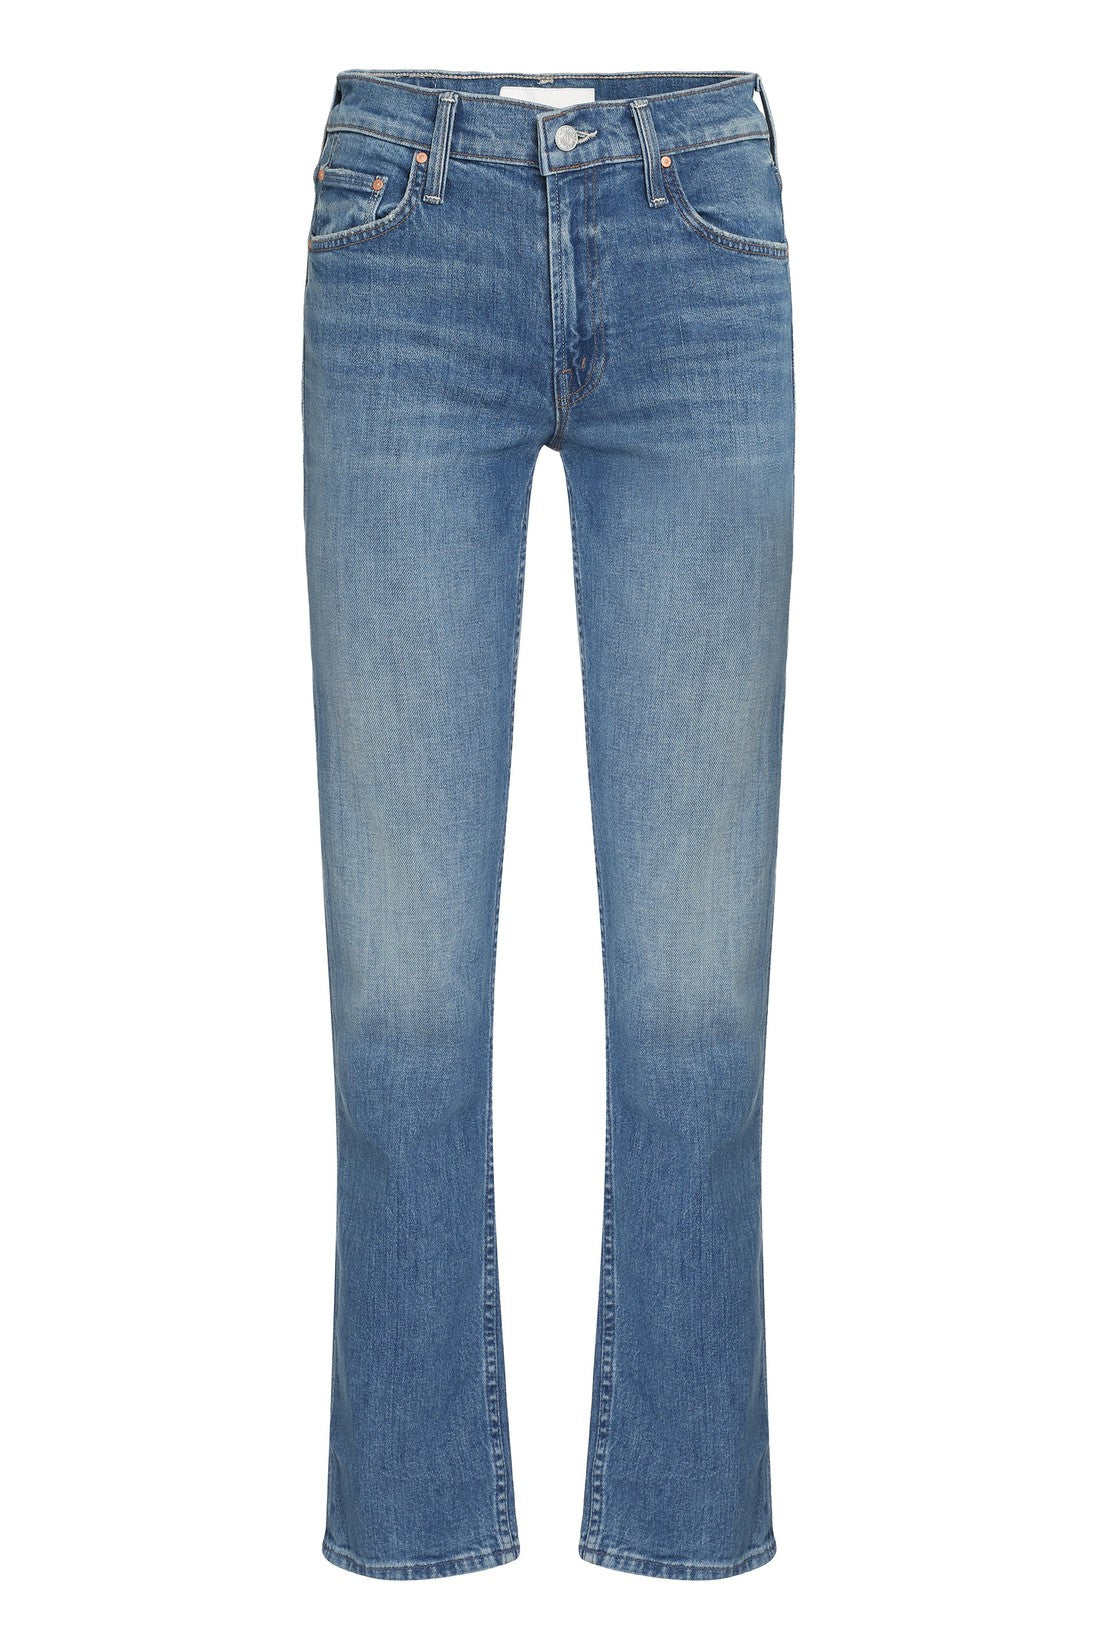 Mother-OUTLET-SALE-The Smarty straight leg jeans-ARCHIVIST